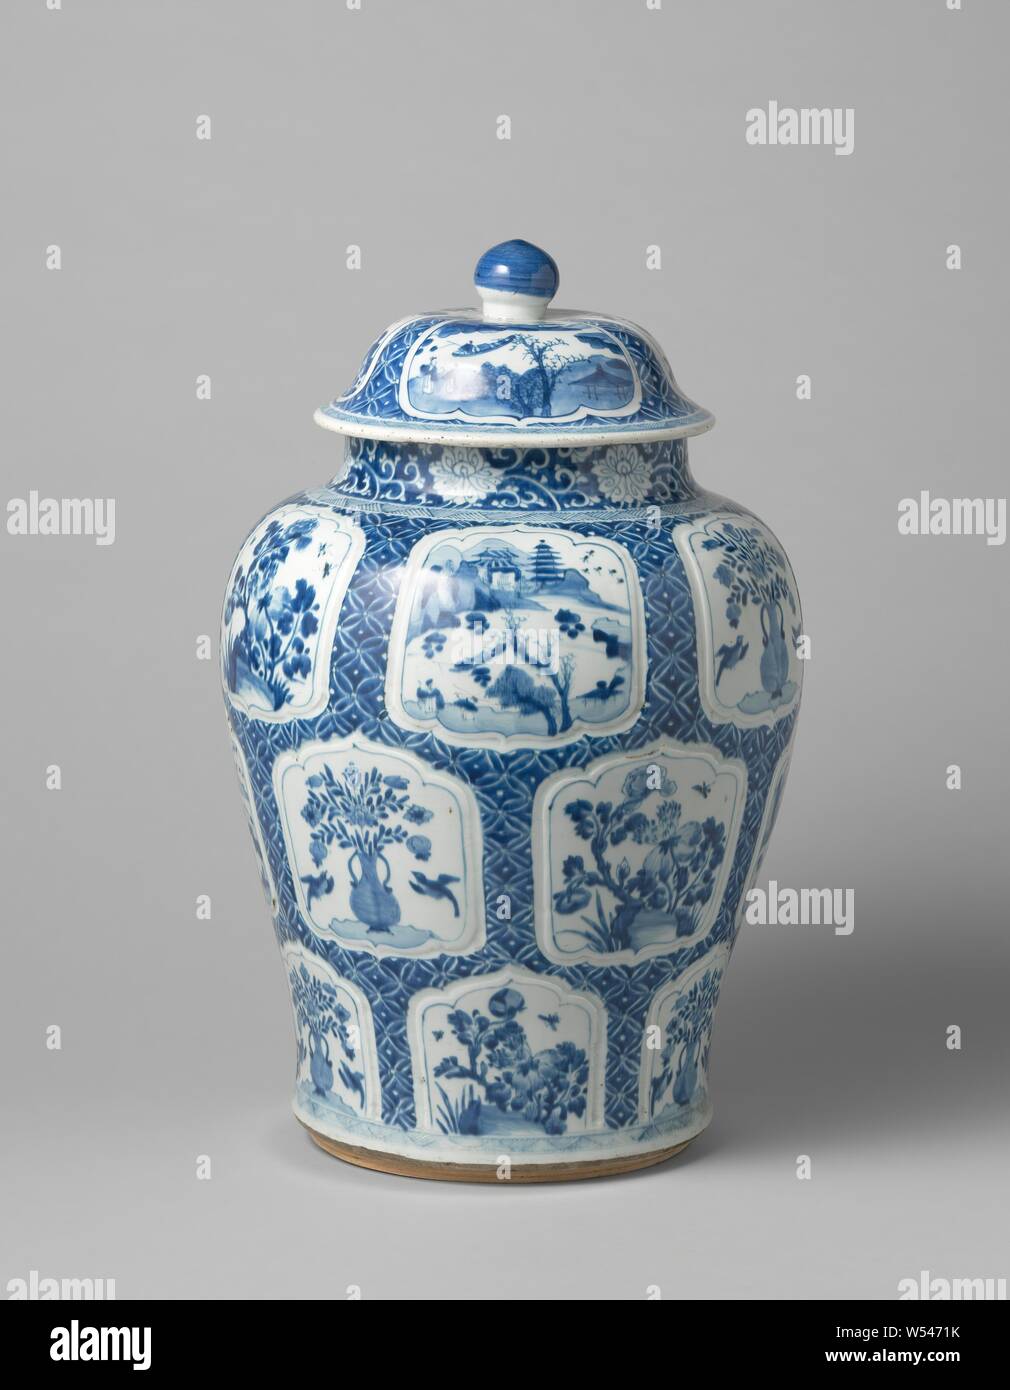 Baluster covered jar with flower vases, flowering plants and landscapes in panels, Baluster-shaped porcelain covered pot, painted in underglaze blue. The belly is covered with napkin work containing saved, modeled, scalloped cartouches with a flower vase (lotus) with two birds, flowering plants (peony) near a rock or a river cap with two people, a boat, pavilions, trees and mountains. The neck with stylized lotus tendrils. On the shoulder and around the foot a band with hatching. Blue and white., anonymous, China, c. 1680 - c. 1720, Kangxi-period (1662-1722), porcelain (material), glaze Stock Photo